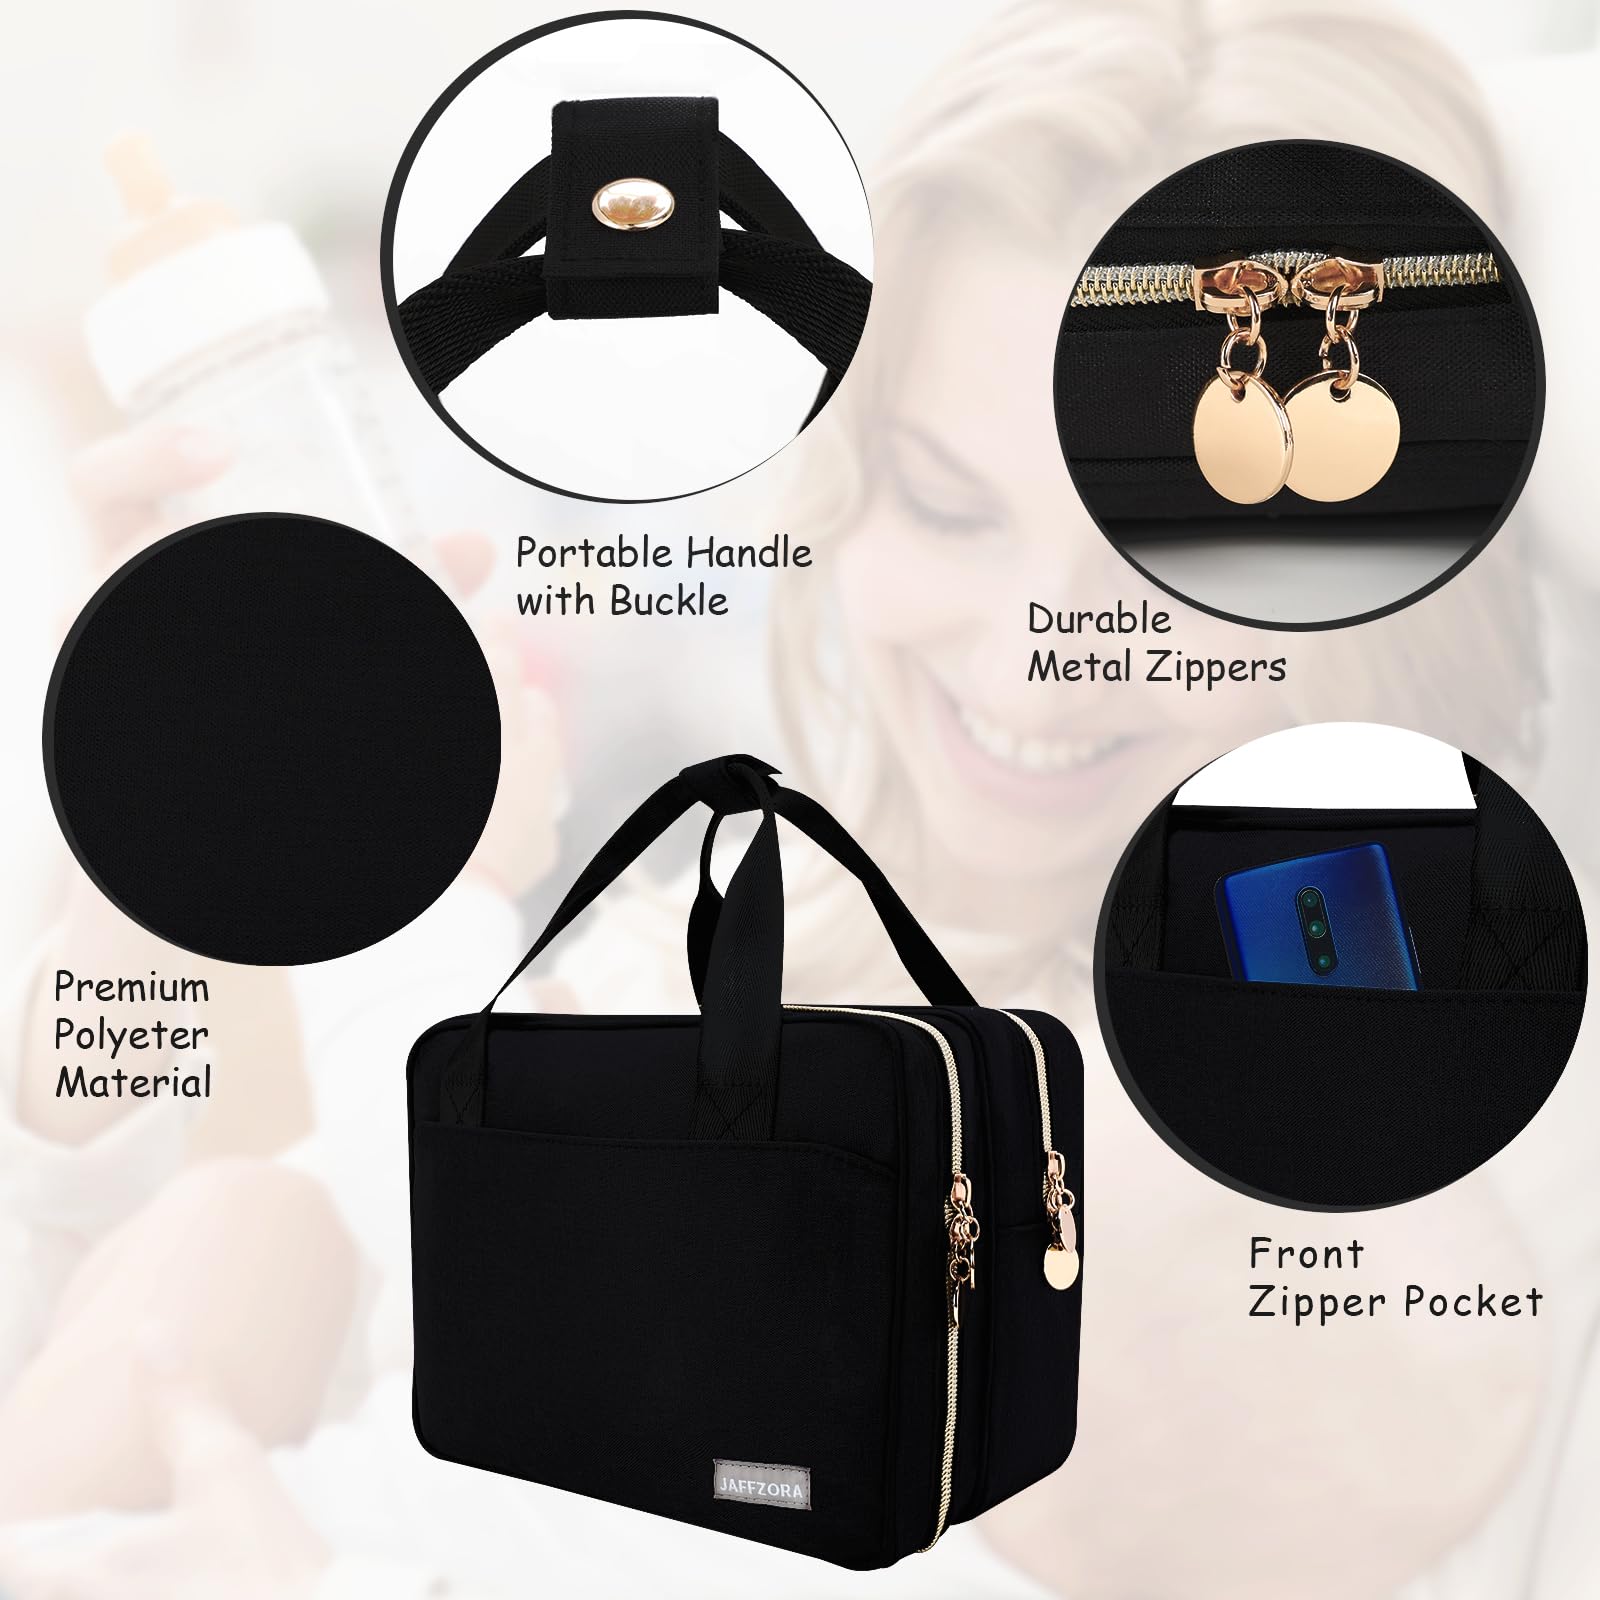 Wearable Breast Pump Bag with Cooler Compatible with Momcozy S12 Pro, Elvie & Medela Pump in Style, Carrying Case for Breast Pump and Accessories, Black(Bag Only)